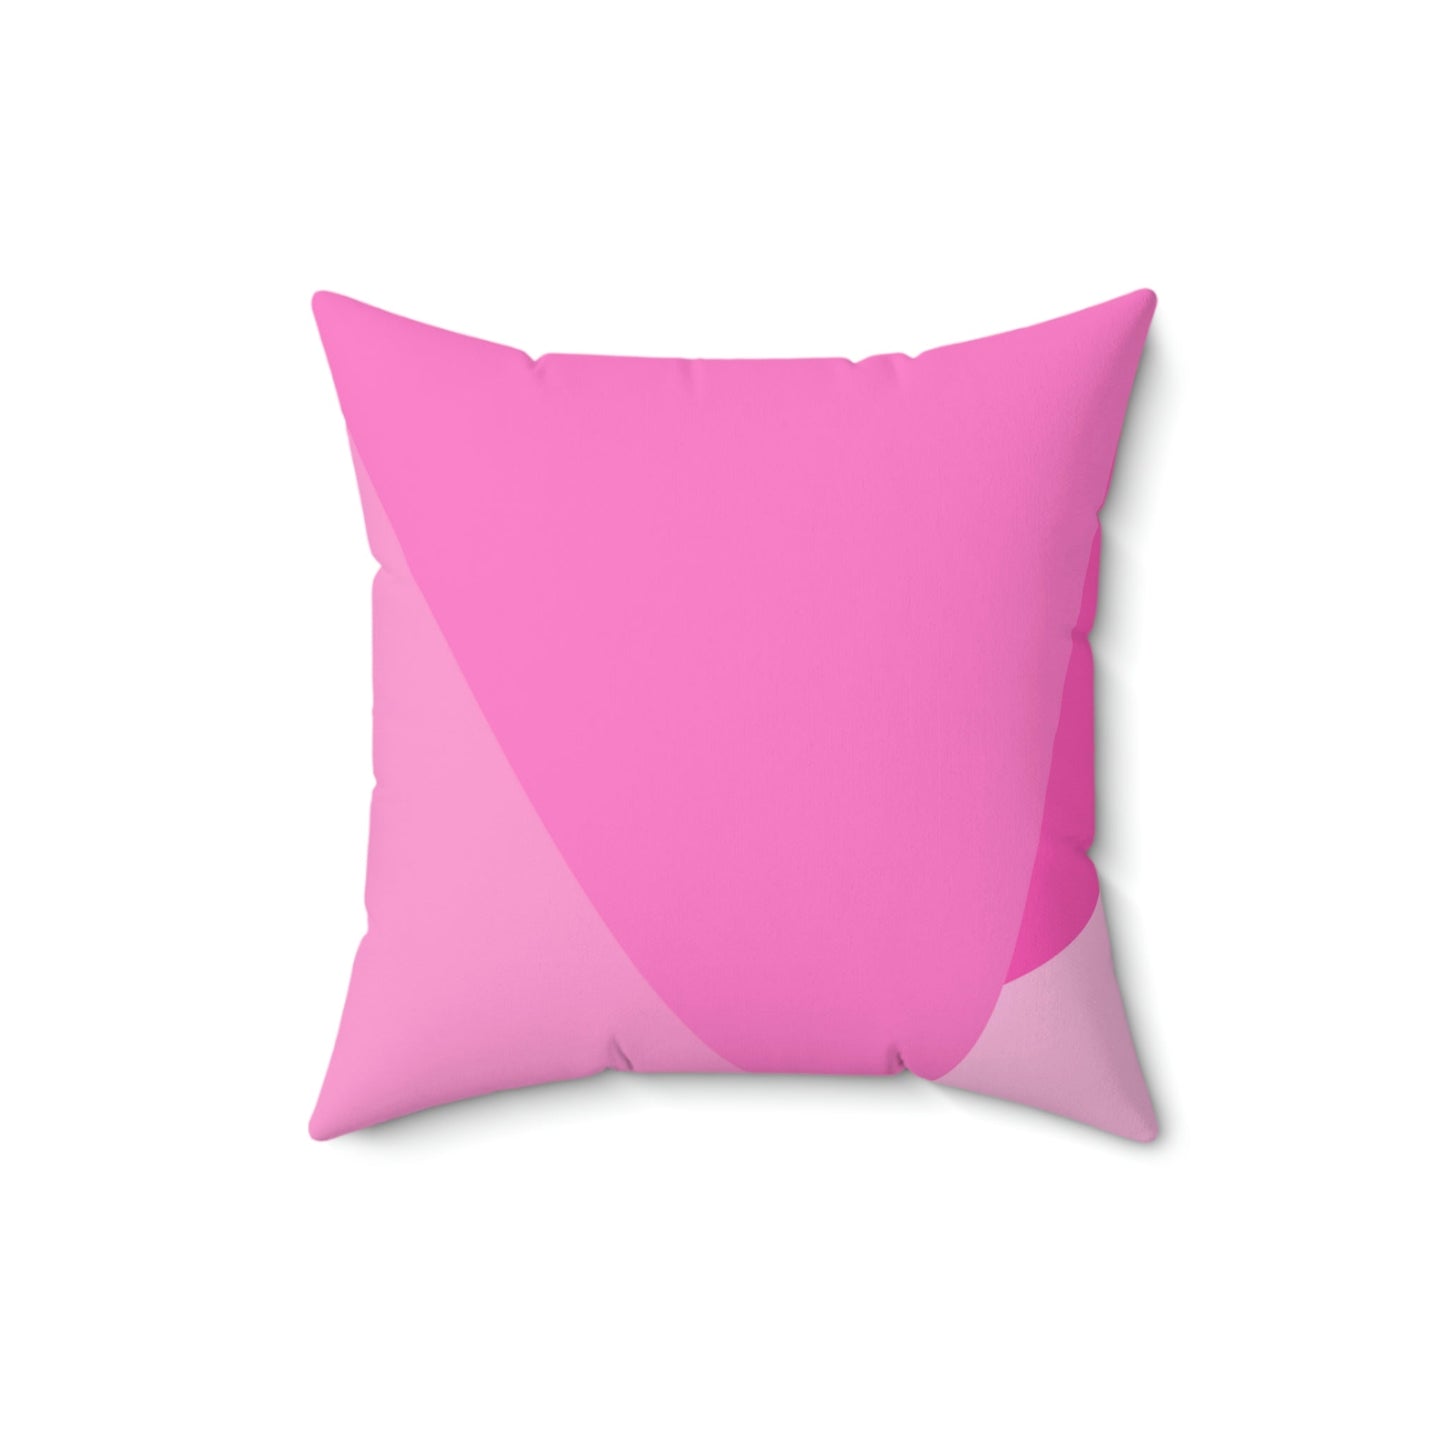 All Shades of Pink Square Pillow Home Decor Pink Sweetheart